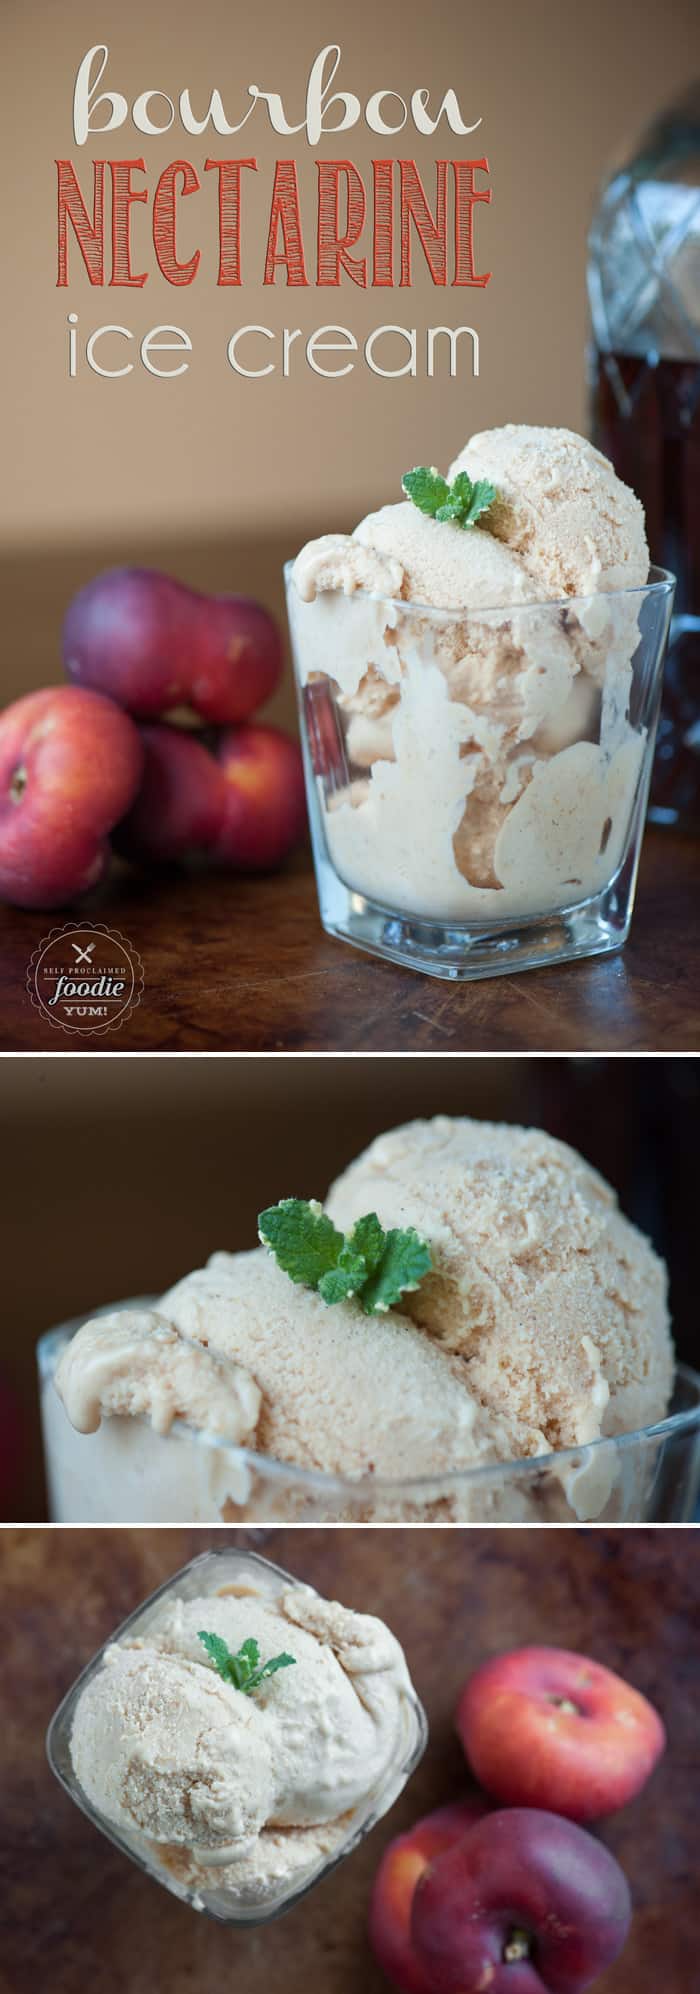 This homemade Bourbon Nectarine Ice Cream is the perfect blend between sweet fresh fruit and creamy vanilla bean ice cream with a smooth bourbon finish.